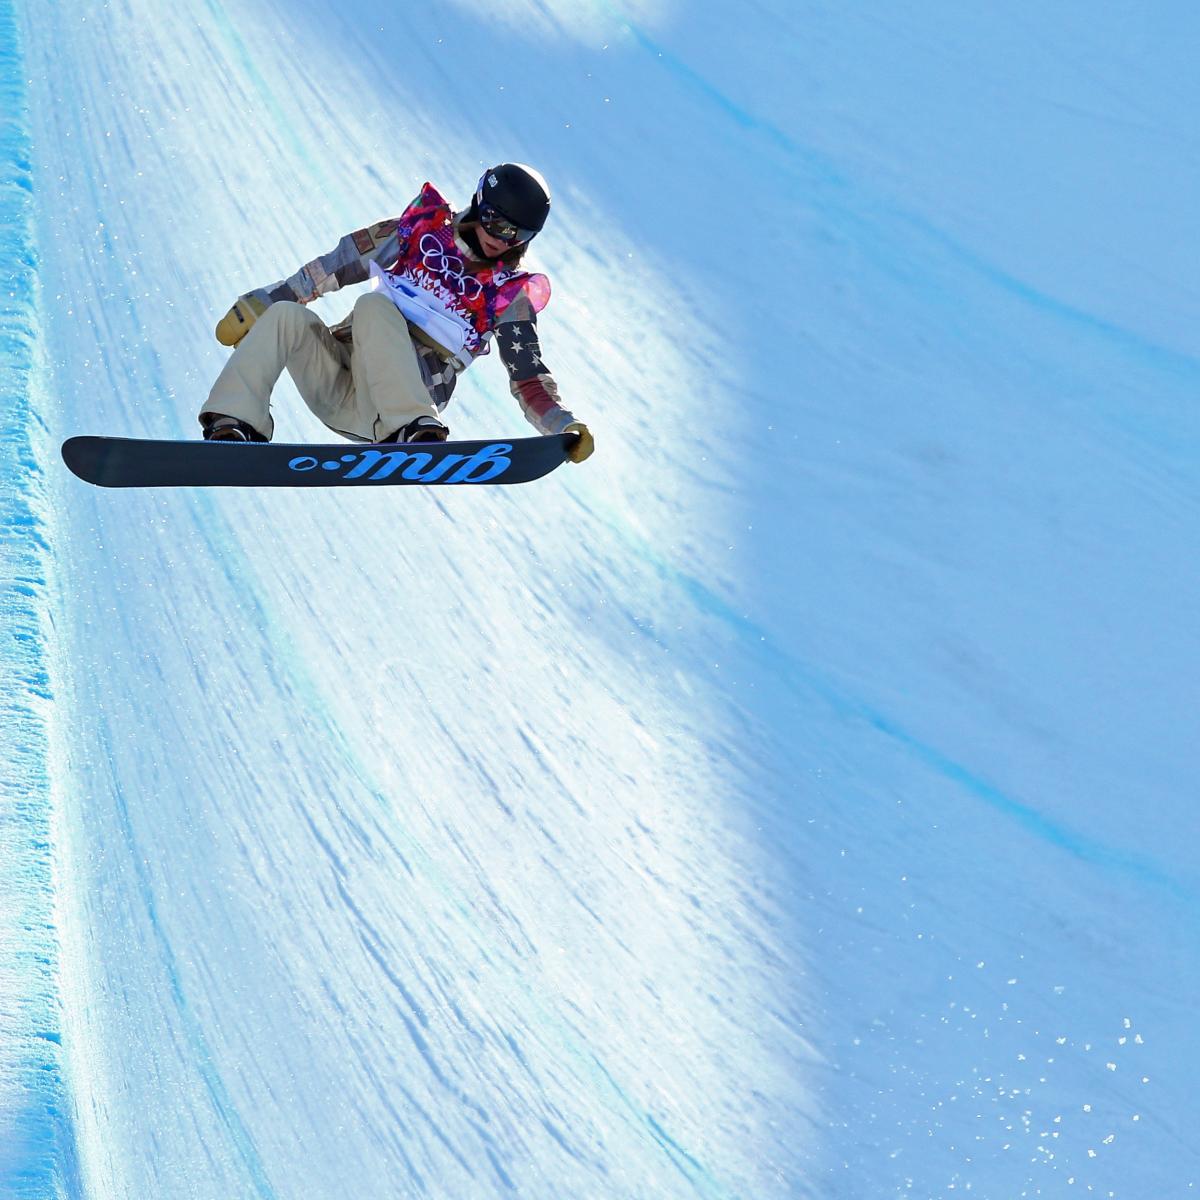 Sochi Winter Olympics 2014 Coolest Photos From Day 5 News Scores